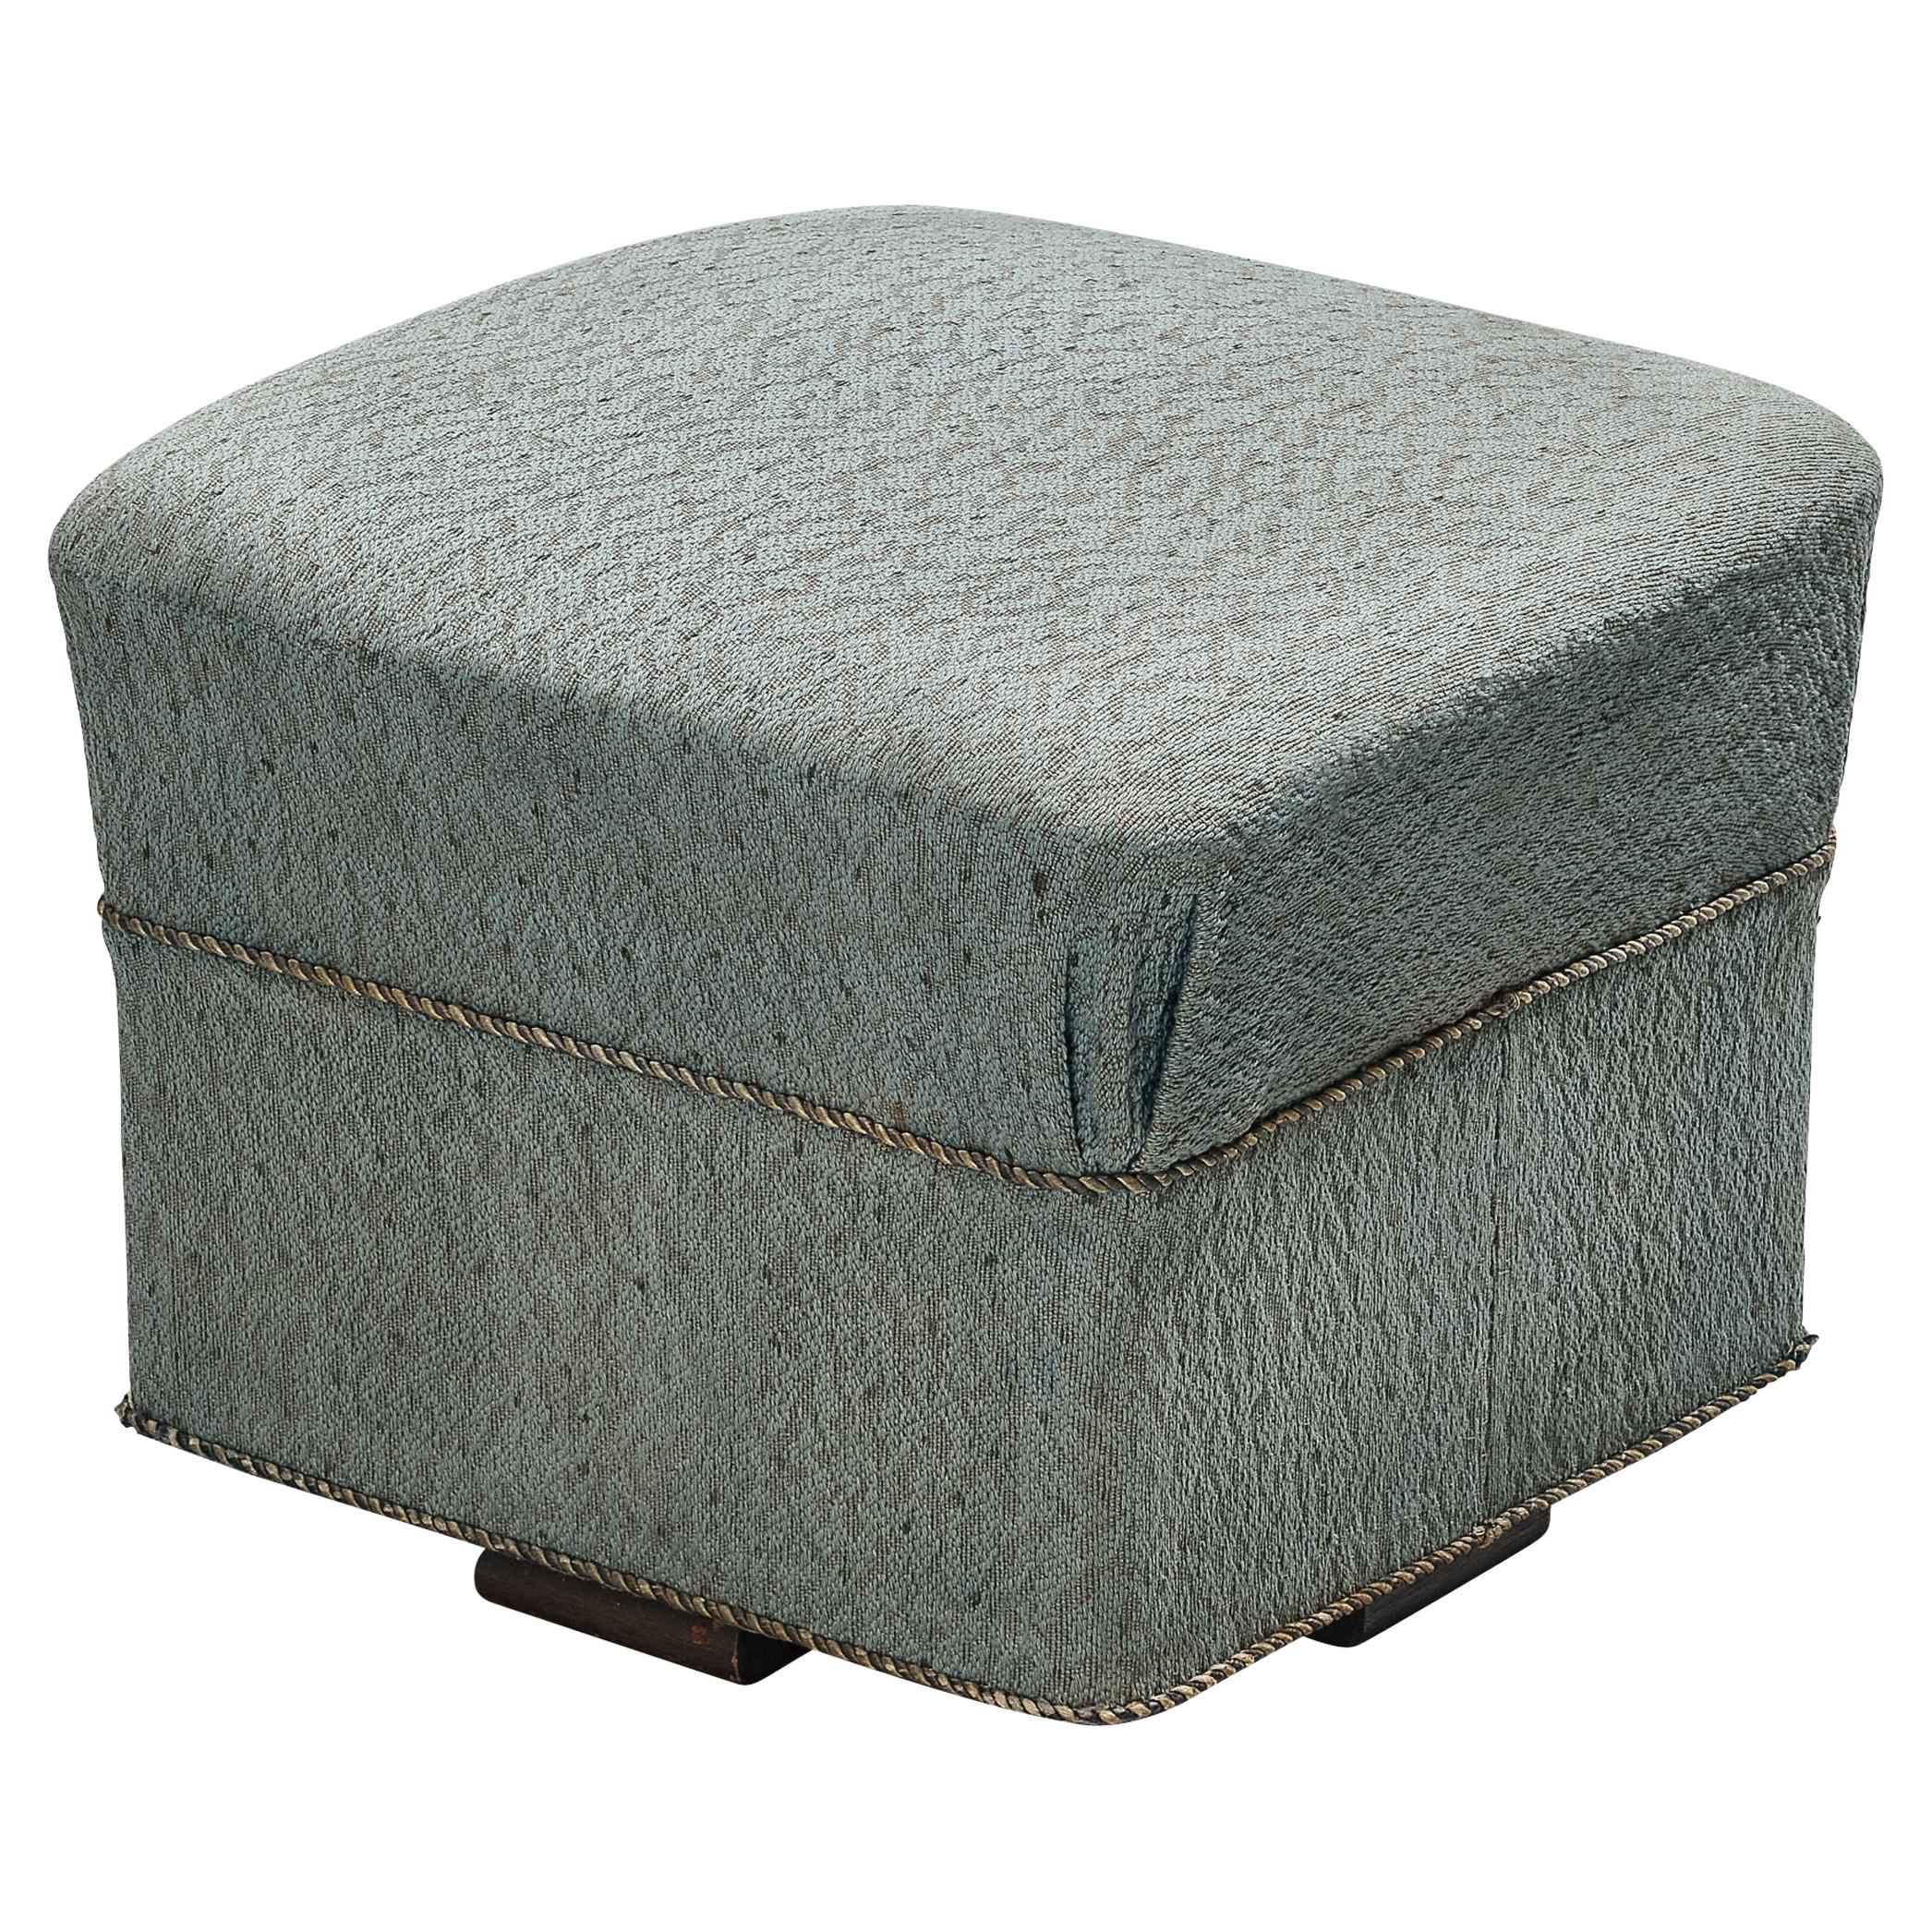 Jindrich Halabala Square Stool in Light Blue Upholstery For Sale